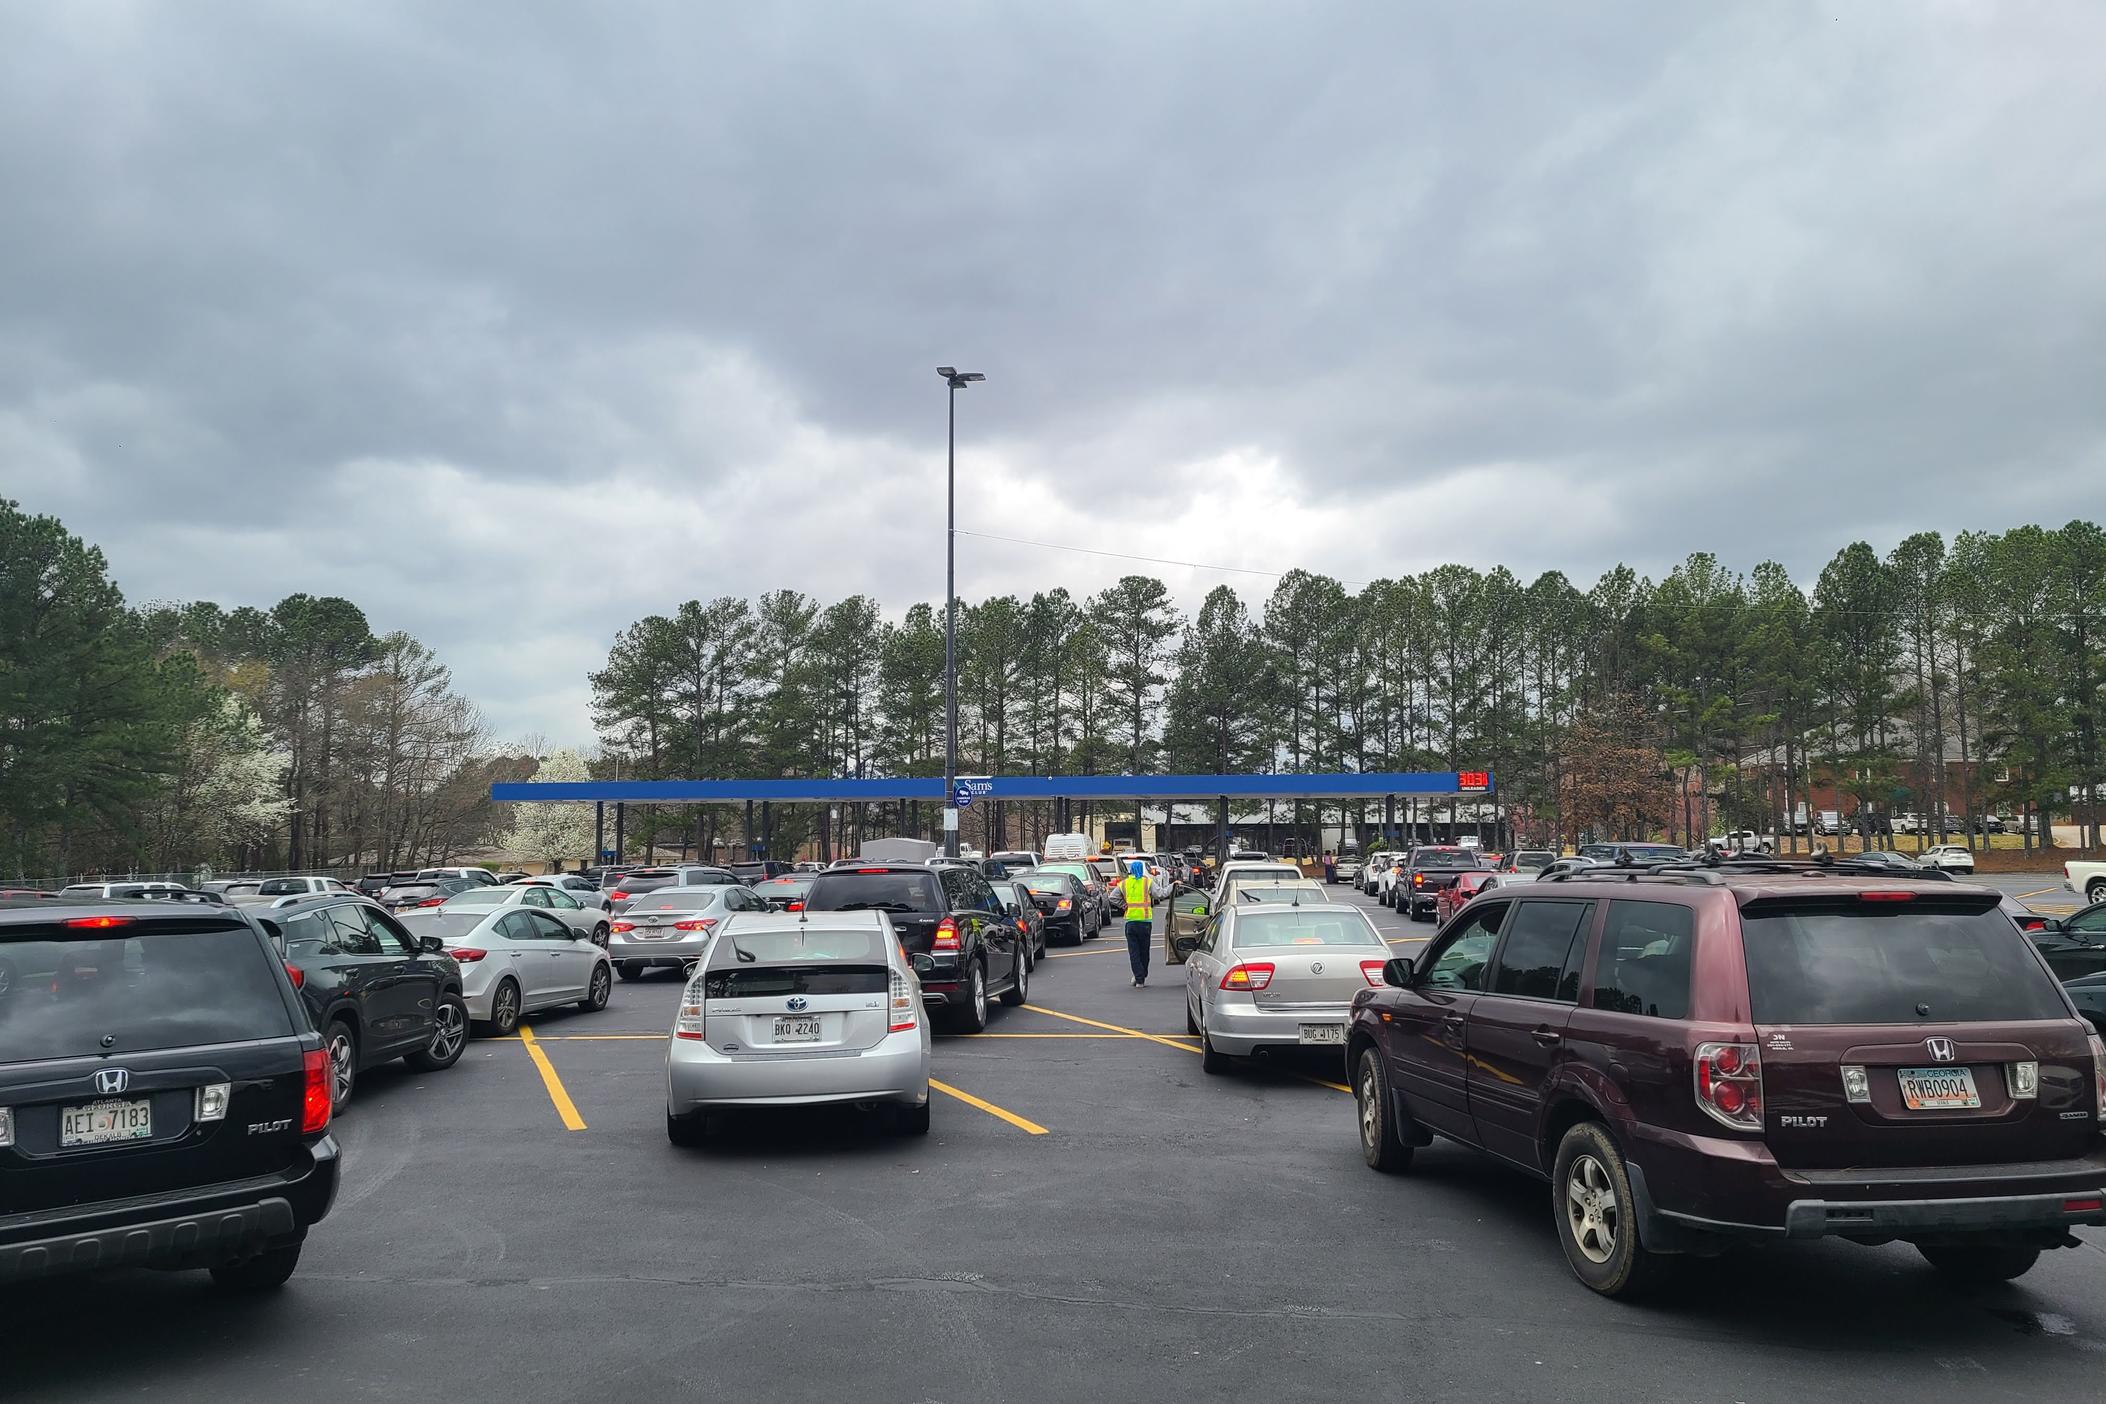 Lines of cars fill the parking lot by the gas pumps at Sam's Club in Tucker, Georgia as drivers wait to fill up with the discount gas.